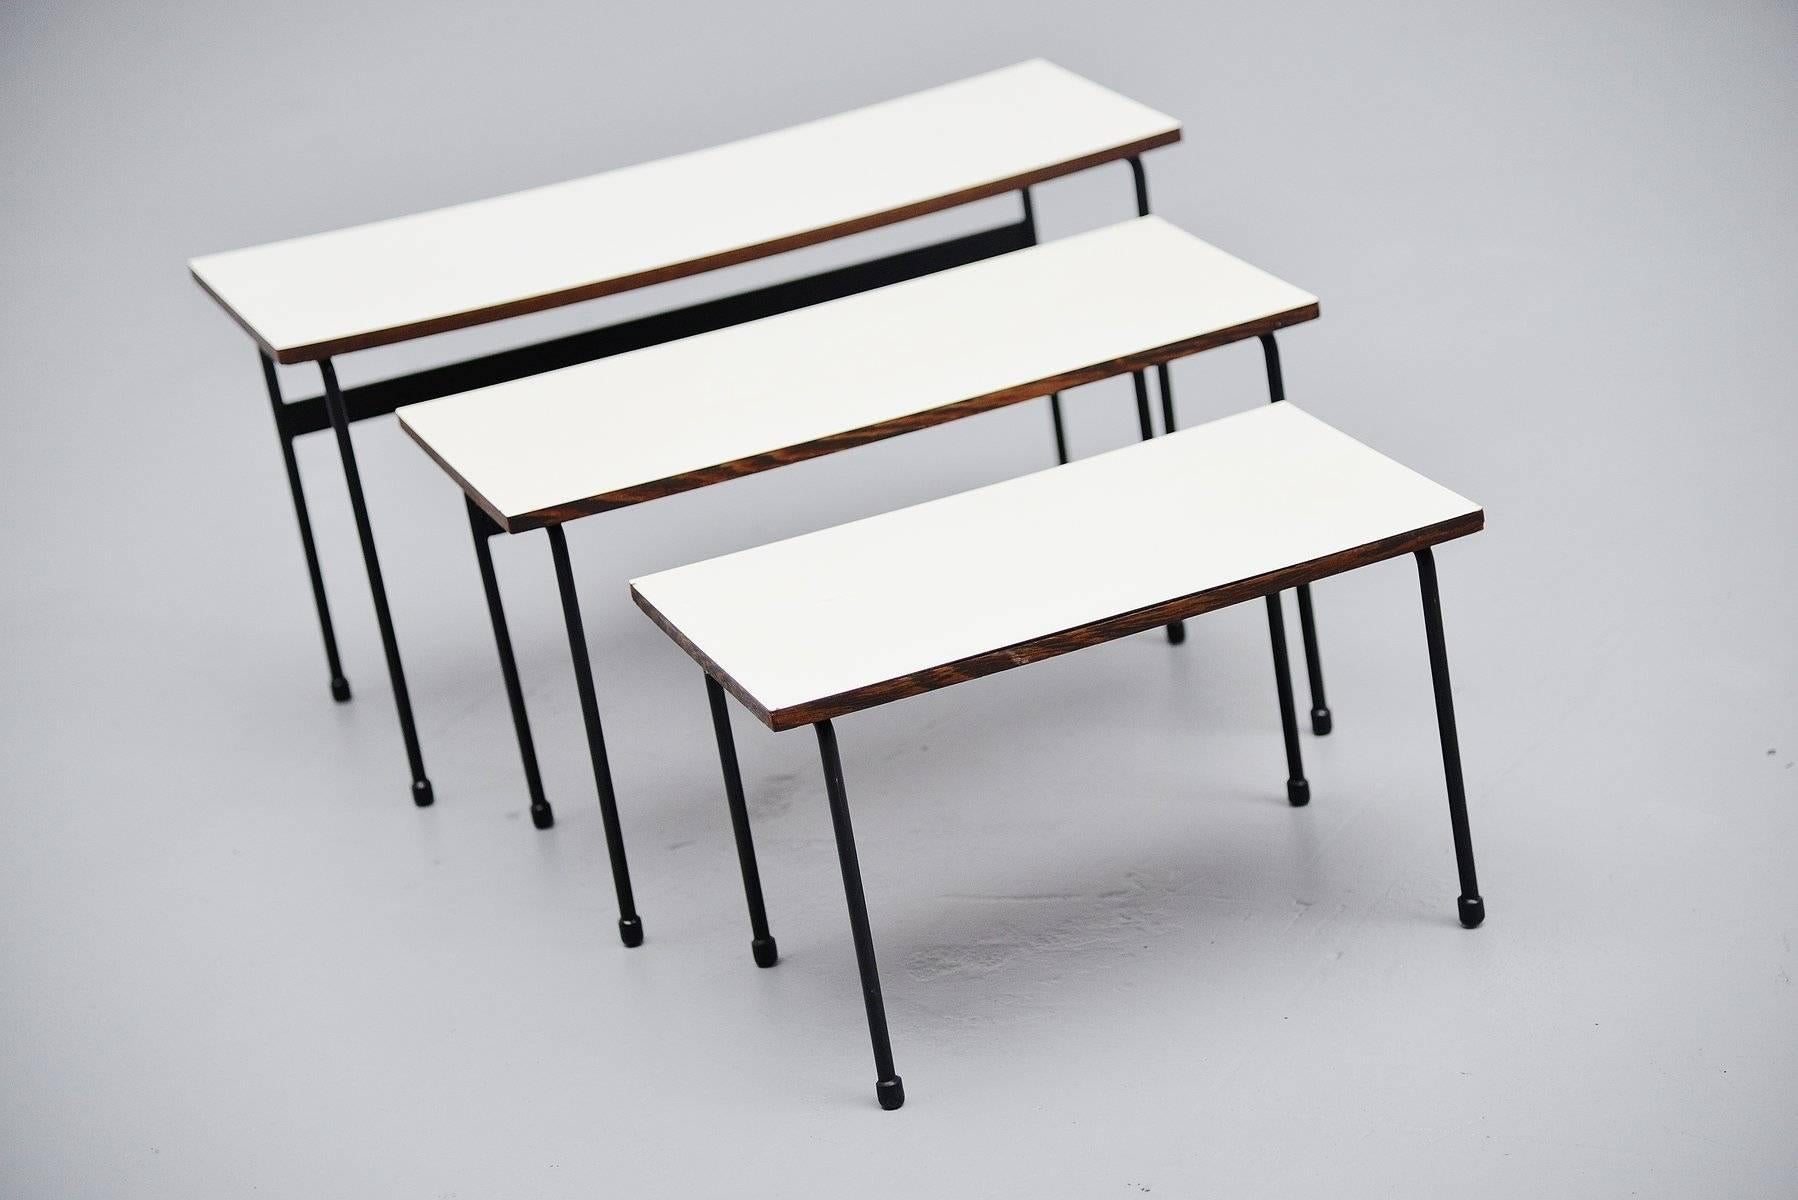 Very nice and rare set of nesting tables designed by Martin Visser for 't Spectrym Bergeyk, Holland 1956. These tables are called Twello and they exist in different editions. These have a wenge wooden edge and white formica tops. The frames are made